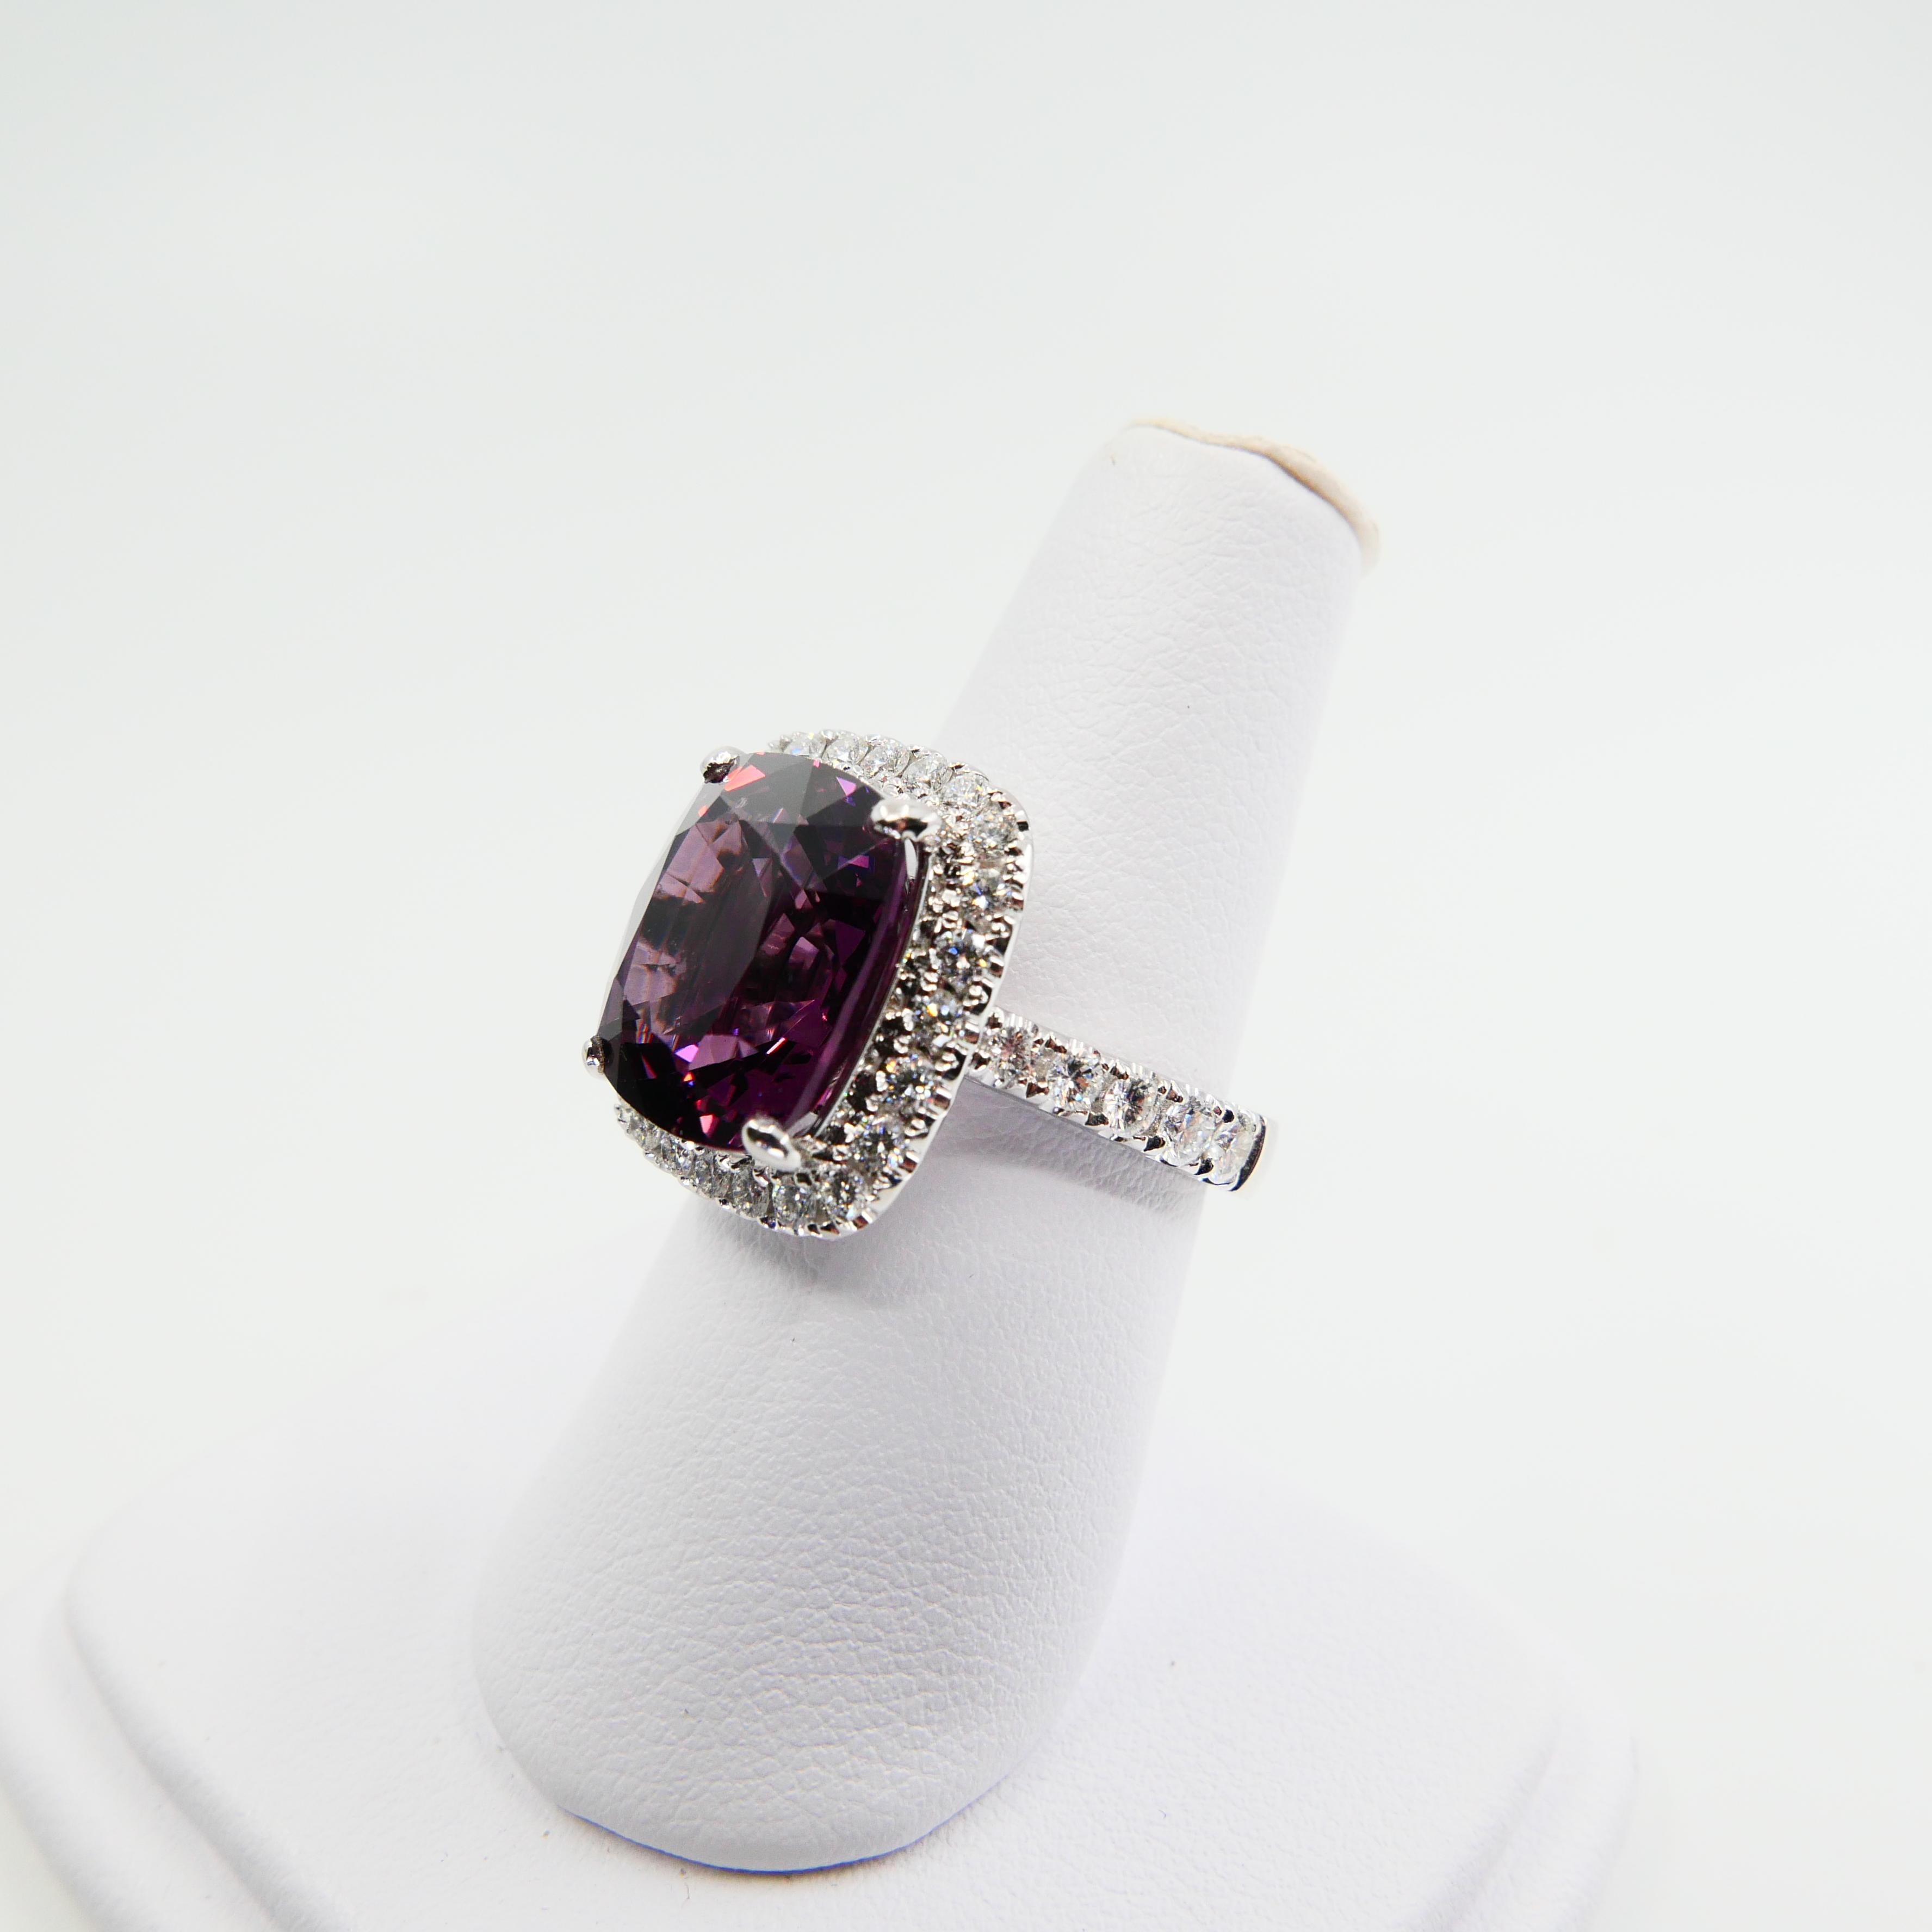 Certified Natural 9.18 Carat Vivid Purple No Heat Spinel & Diamond Cocktail Ring For Sale 8